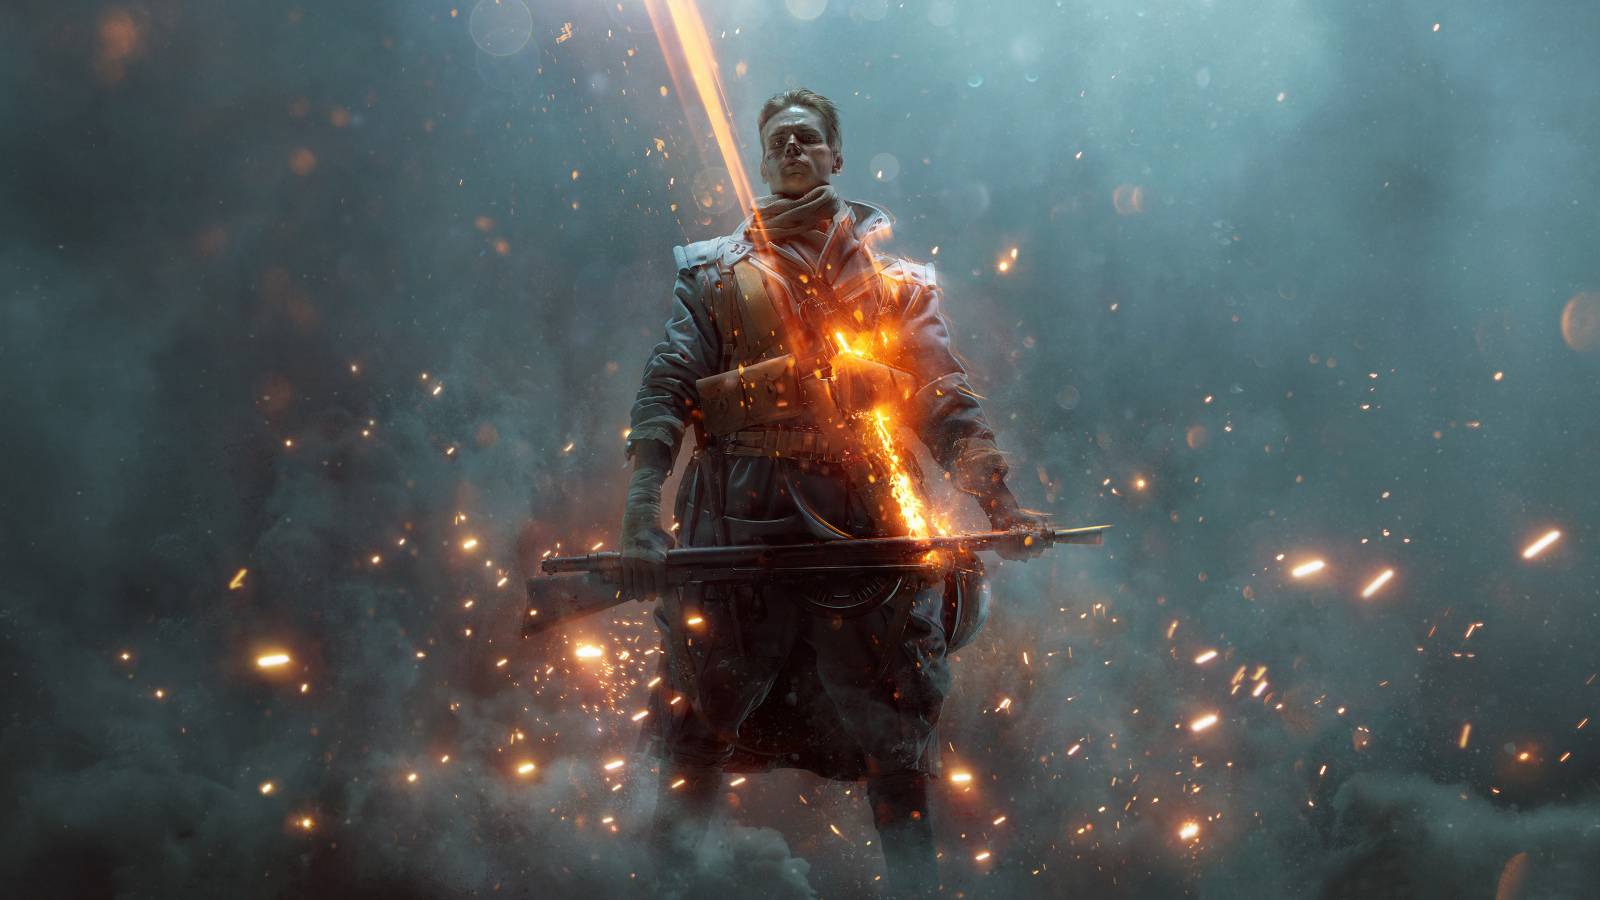 Battlefield 1, They Shall Not Pass, soldier, video game, 2017, 1600x900 wallpaper